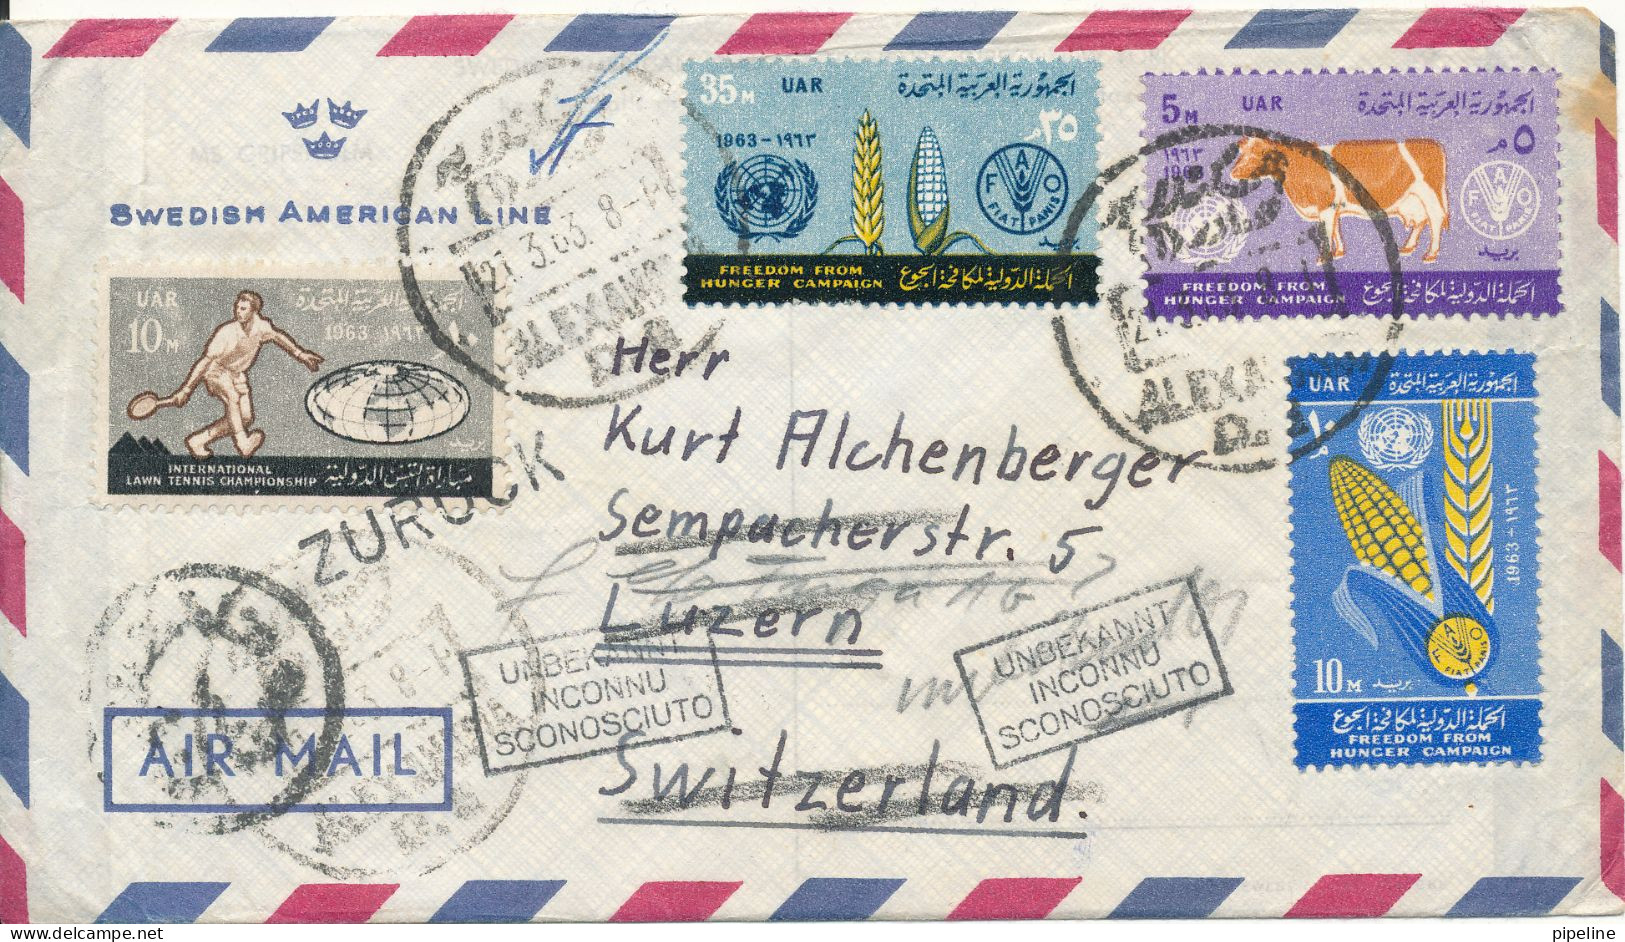 UAR Egypt Air Mail Cover Sent To Switzerland 21-3-1963 And Returned Because Of Unknown Address (Swedish American Line) - Airmail